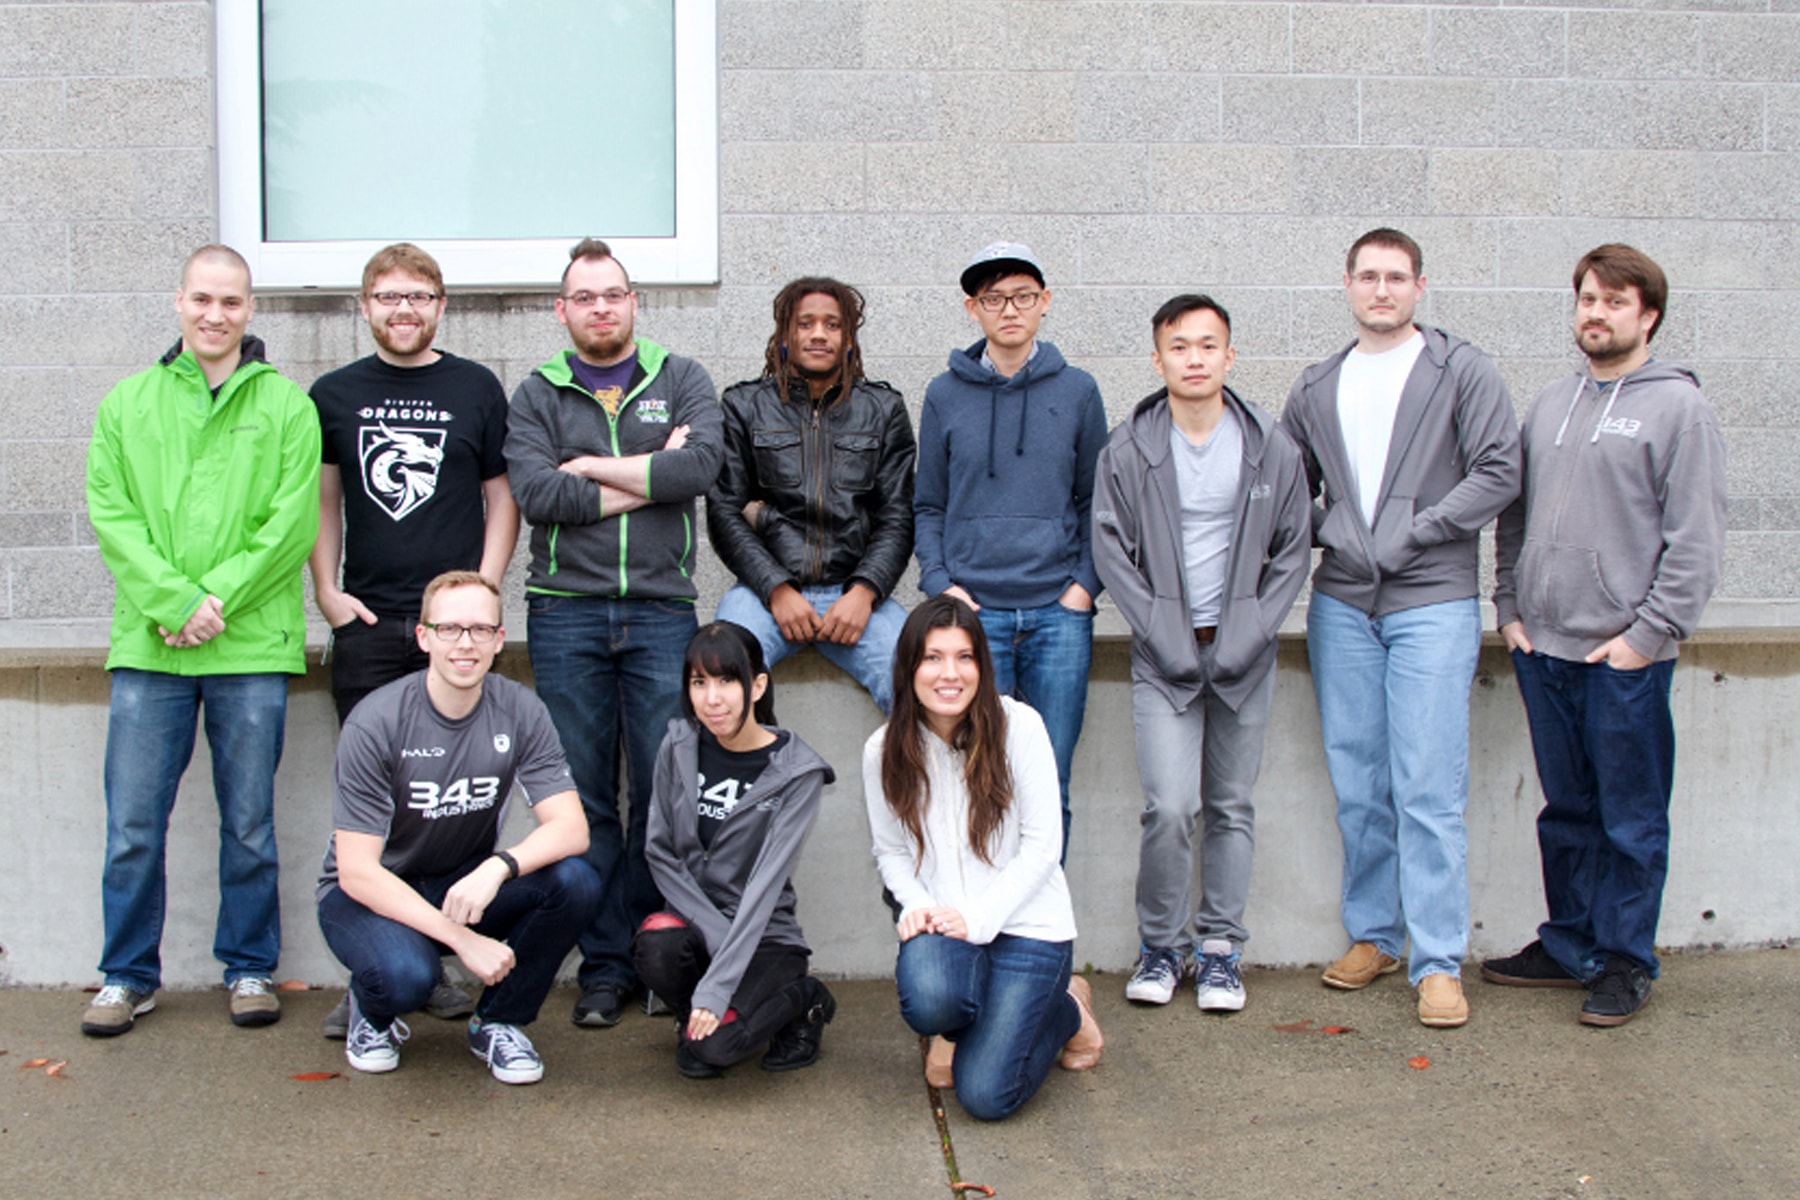 Group photo of 11 DigiPen alumni who worked on Halo 5